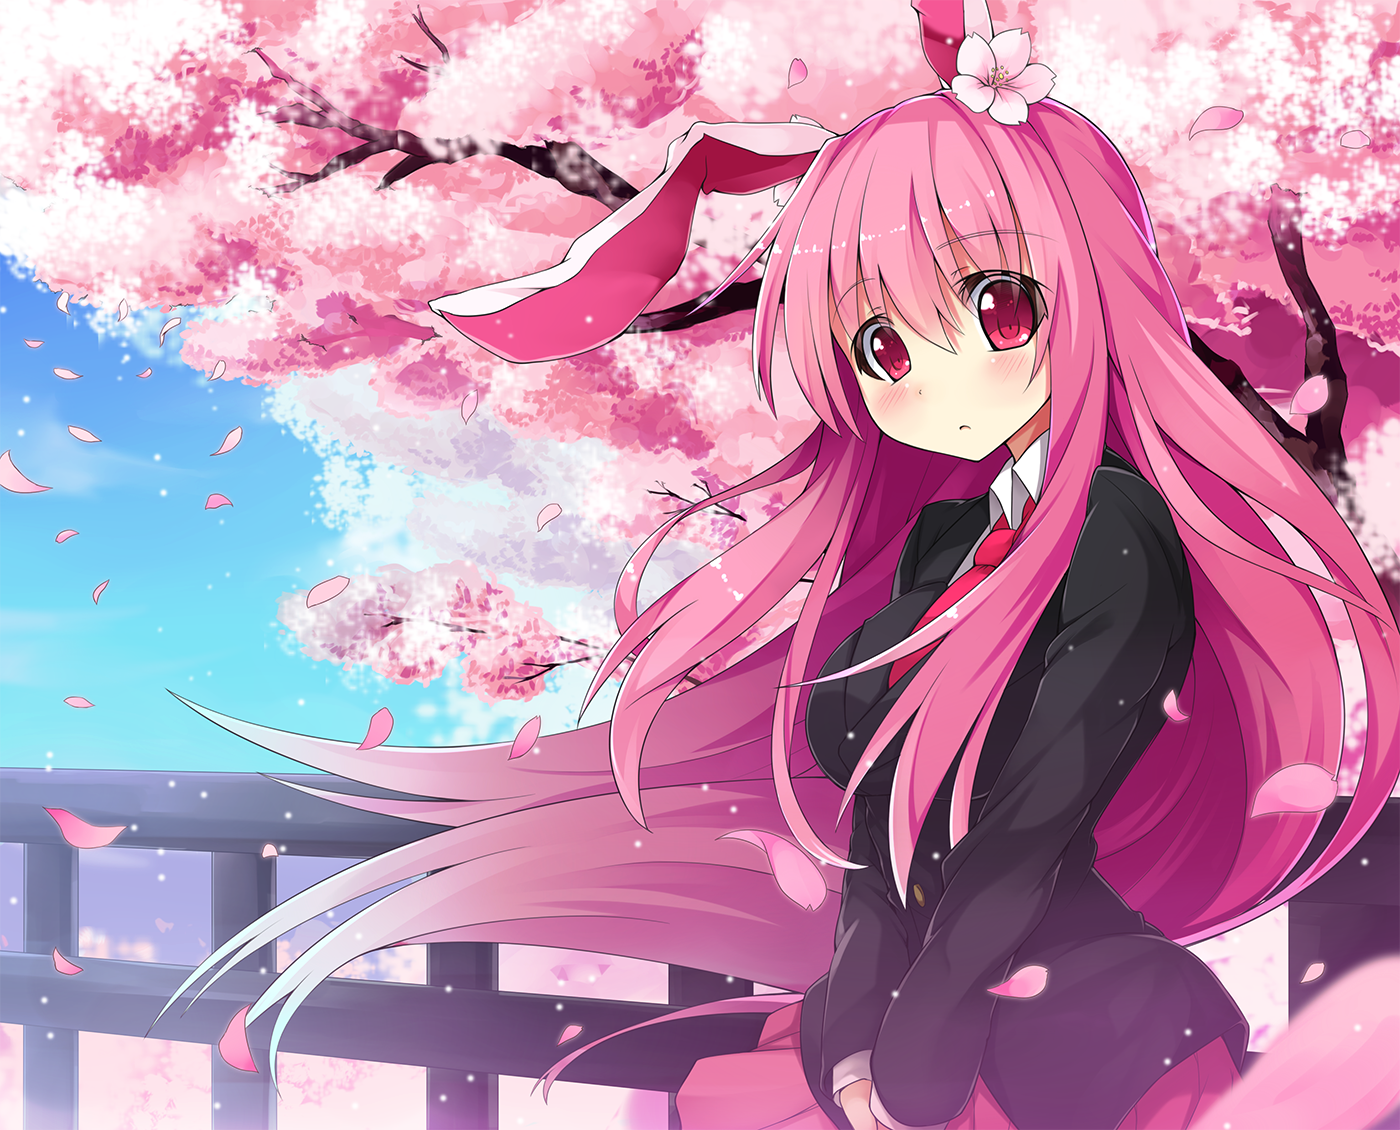 Have Some Bunny Wallpaper and Happy Easter Day! image - Anime Fans of modDB  - Mod DB